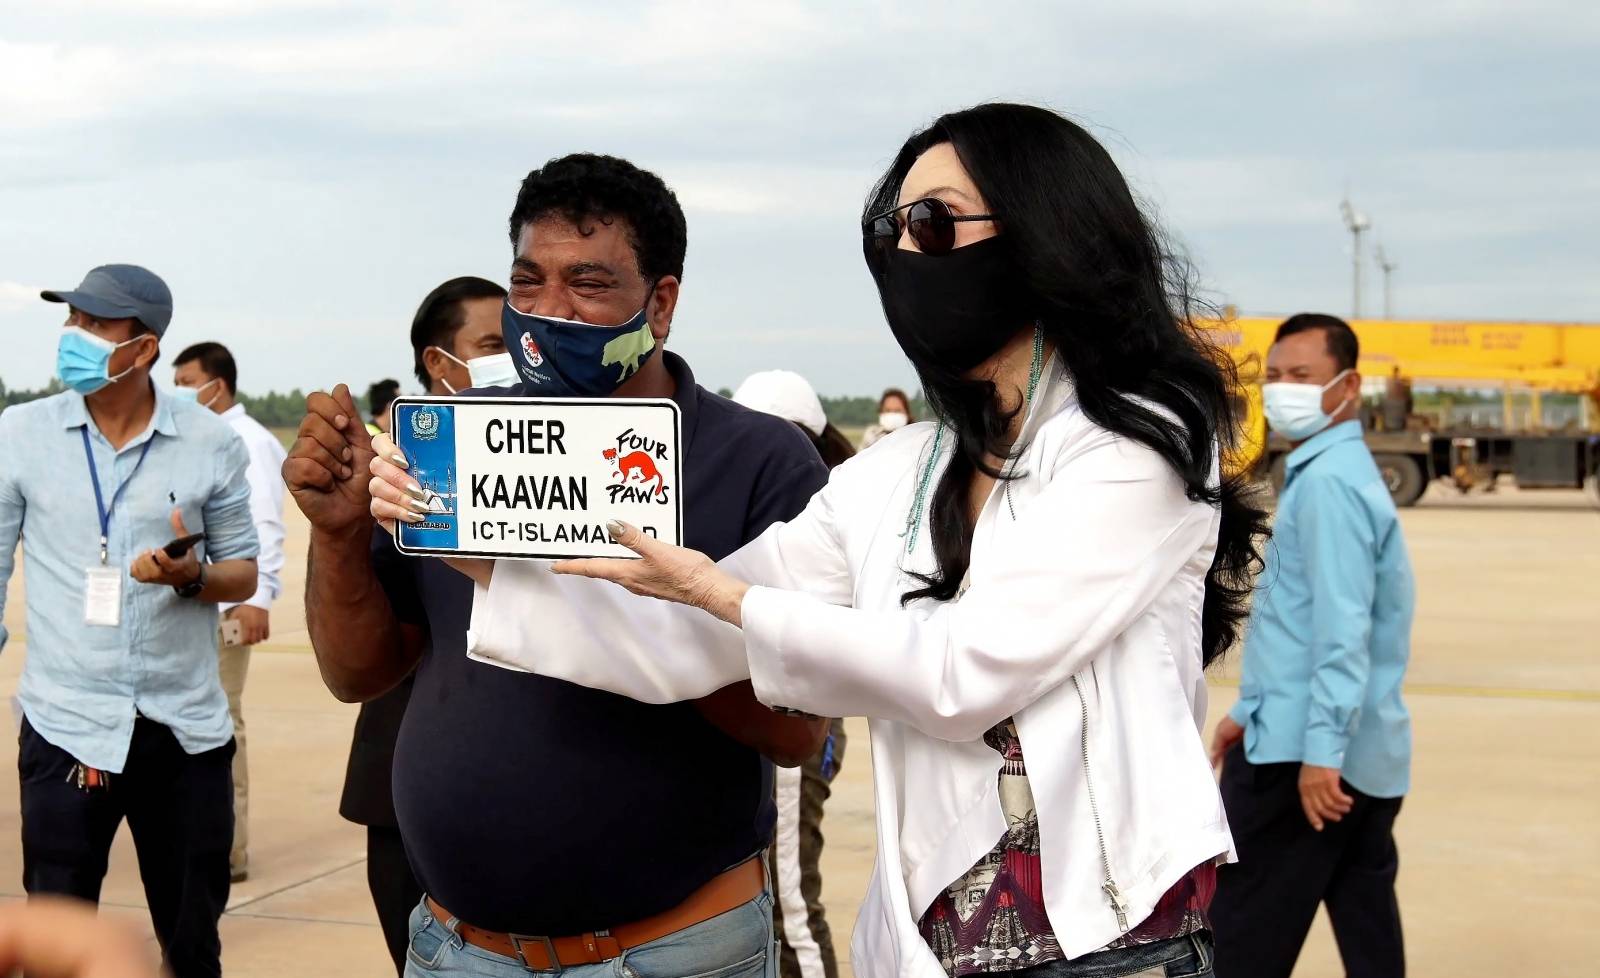 Singer Cher holds a plate with the name of elephant Kaavan at the Siem Reap Airport in Cambodia